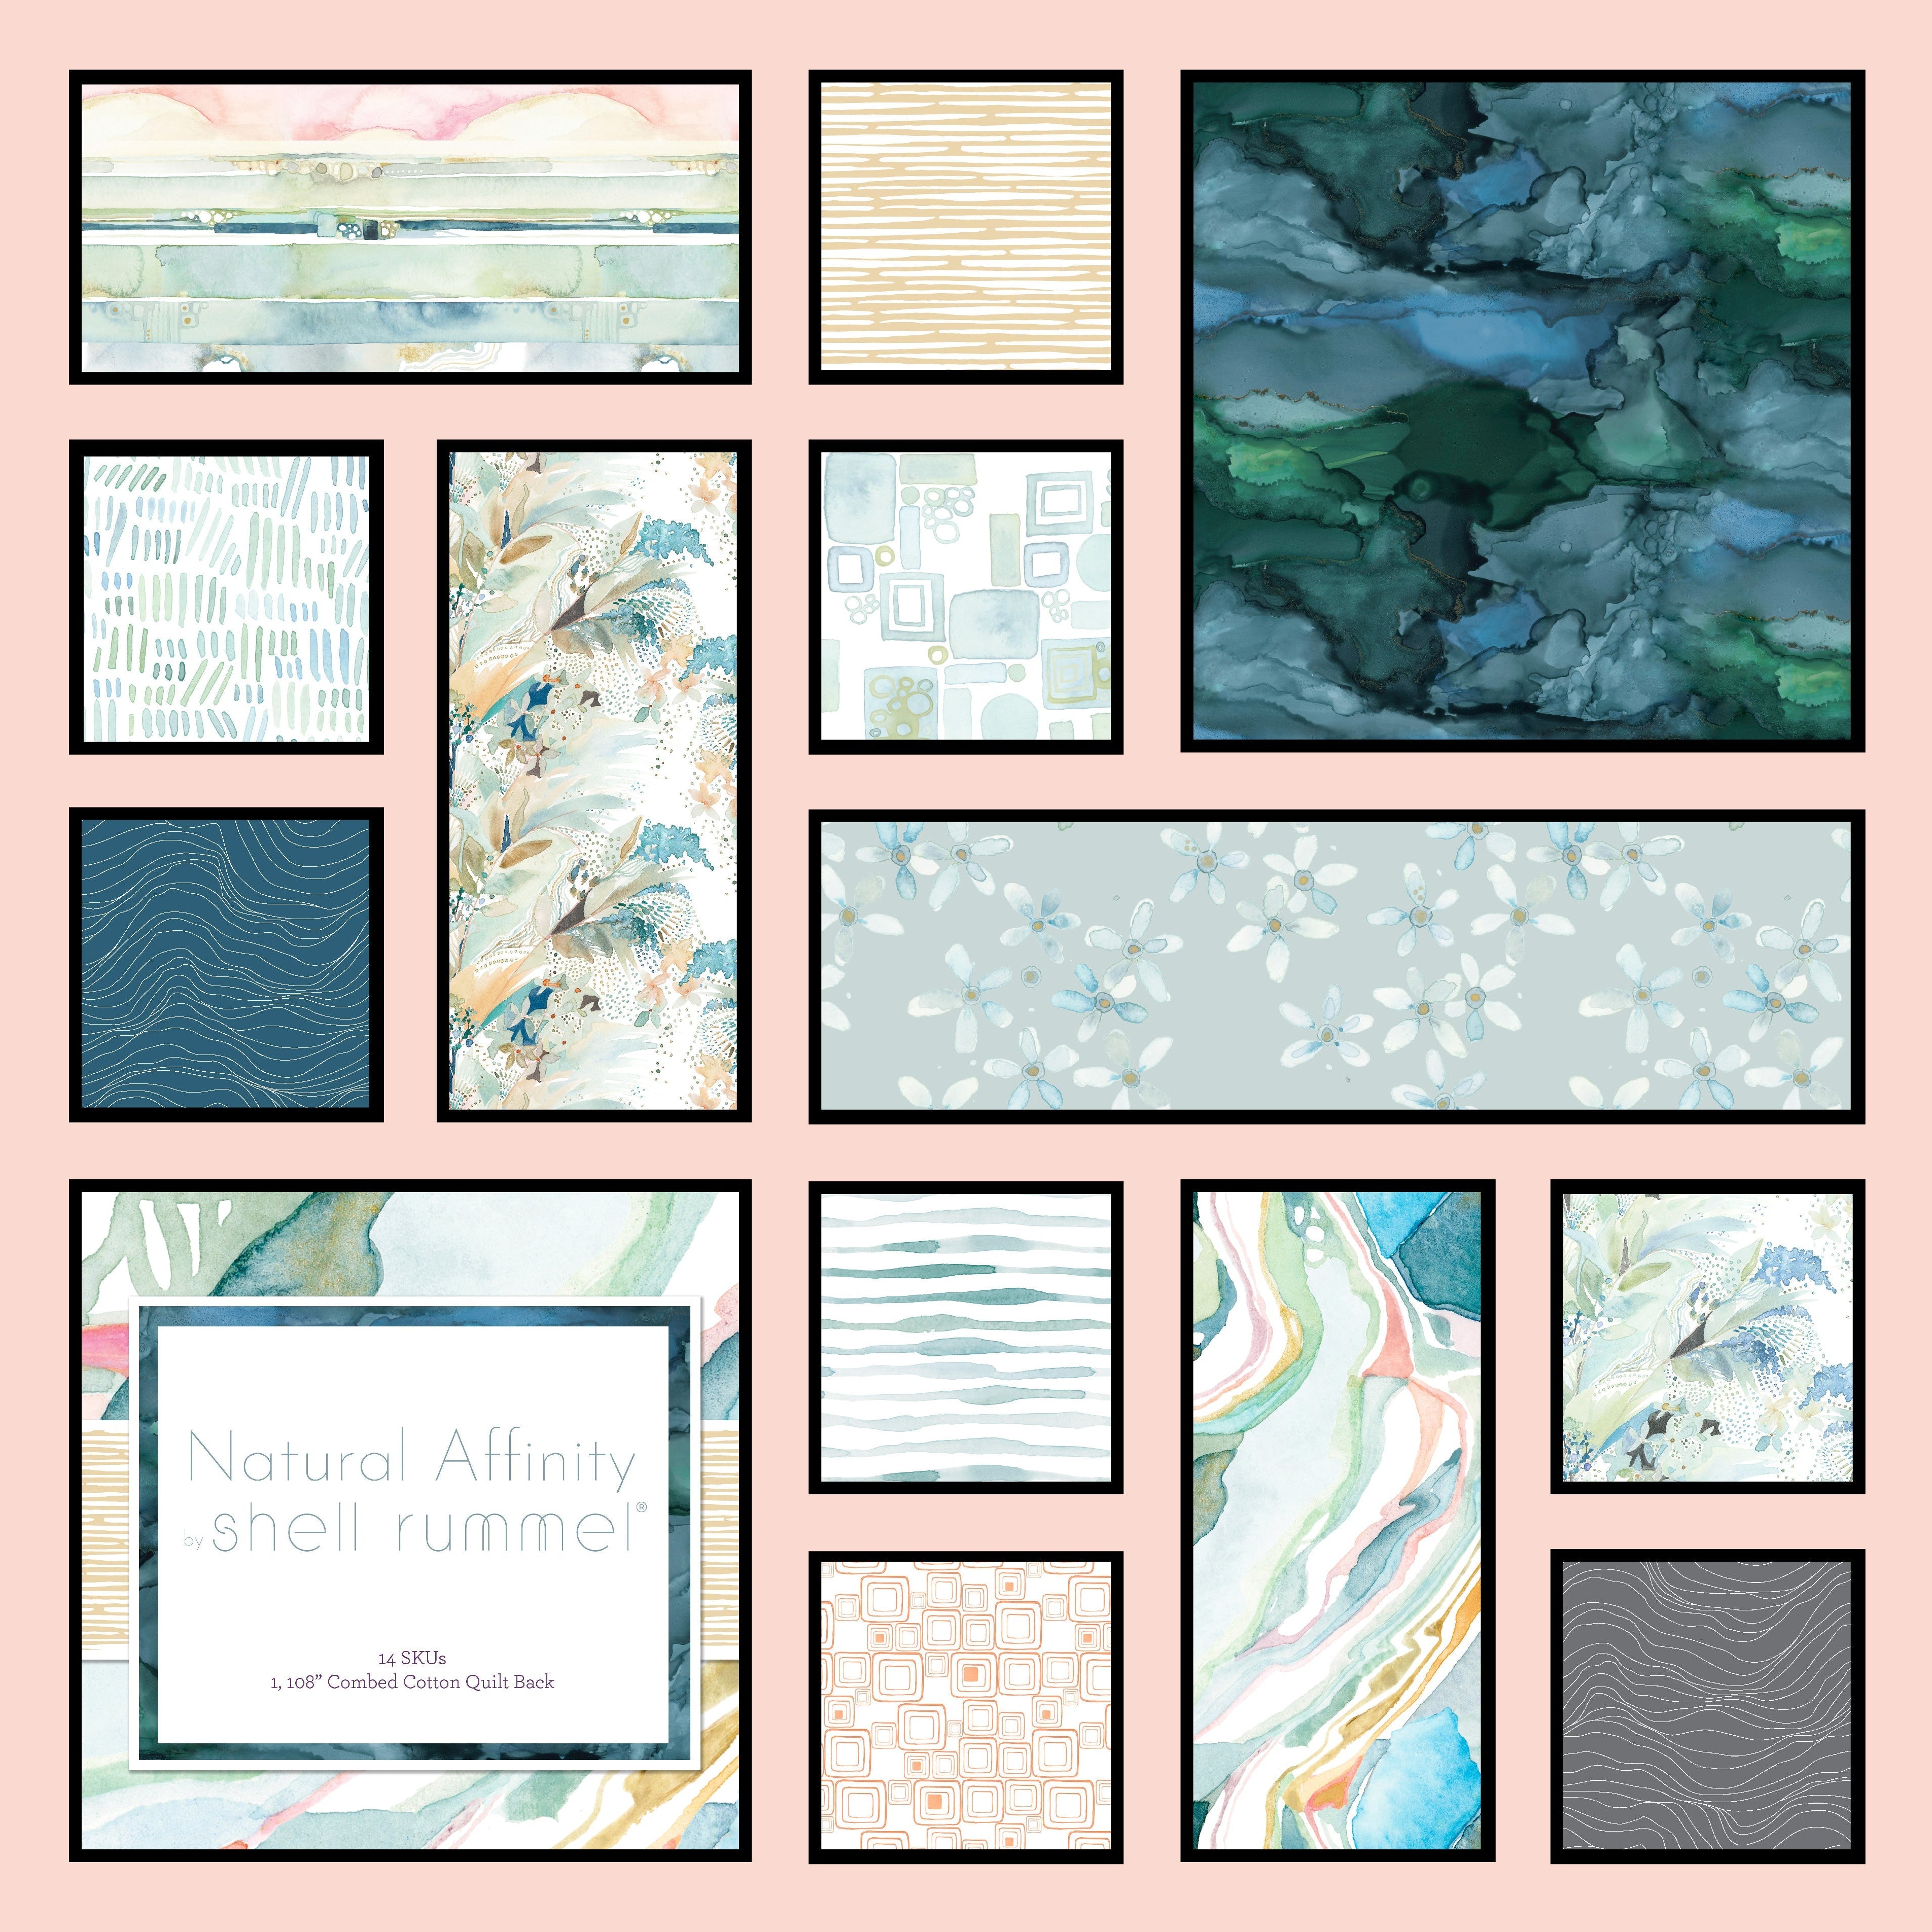 This image shows thirteen fabric swatches in the collection “Natural Affinity” by Shell Rummel. This fabric line was inspired by the artist’s love of the ocean, illustrated by watercolors in blues, greens, and blushes.